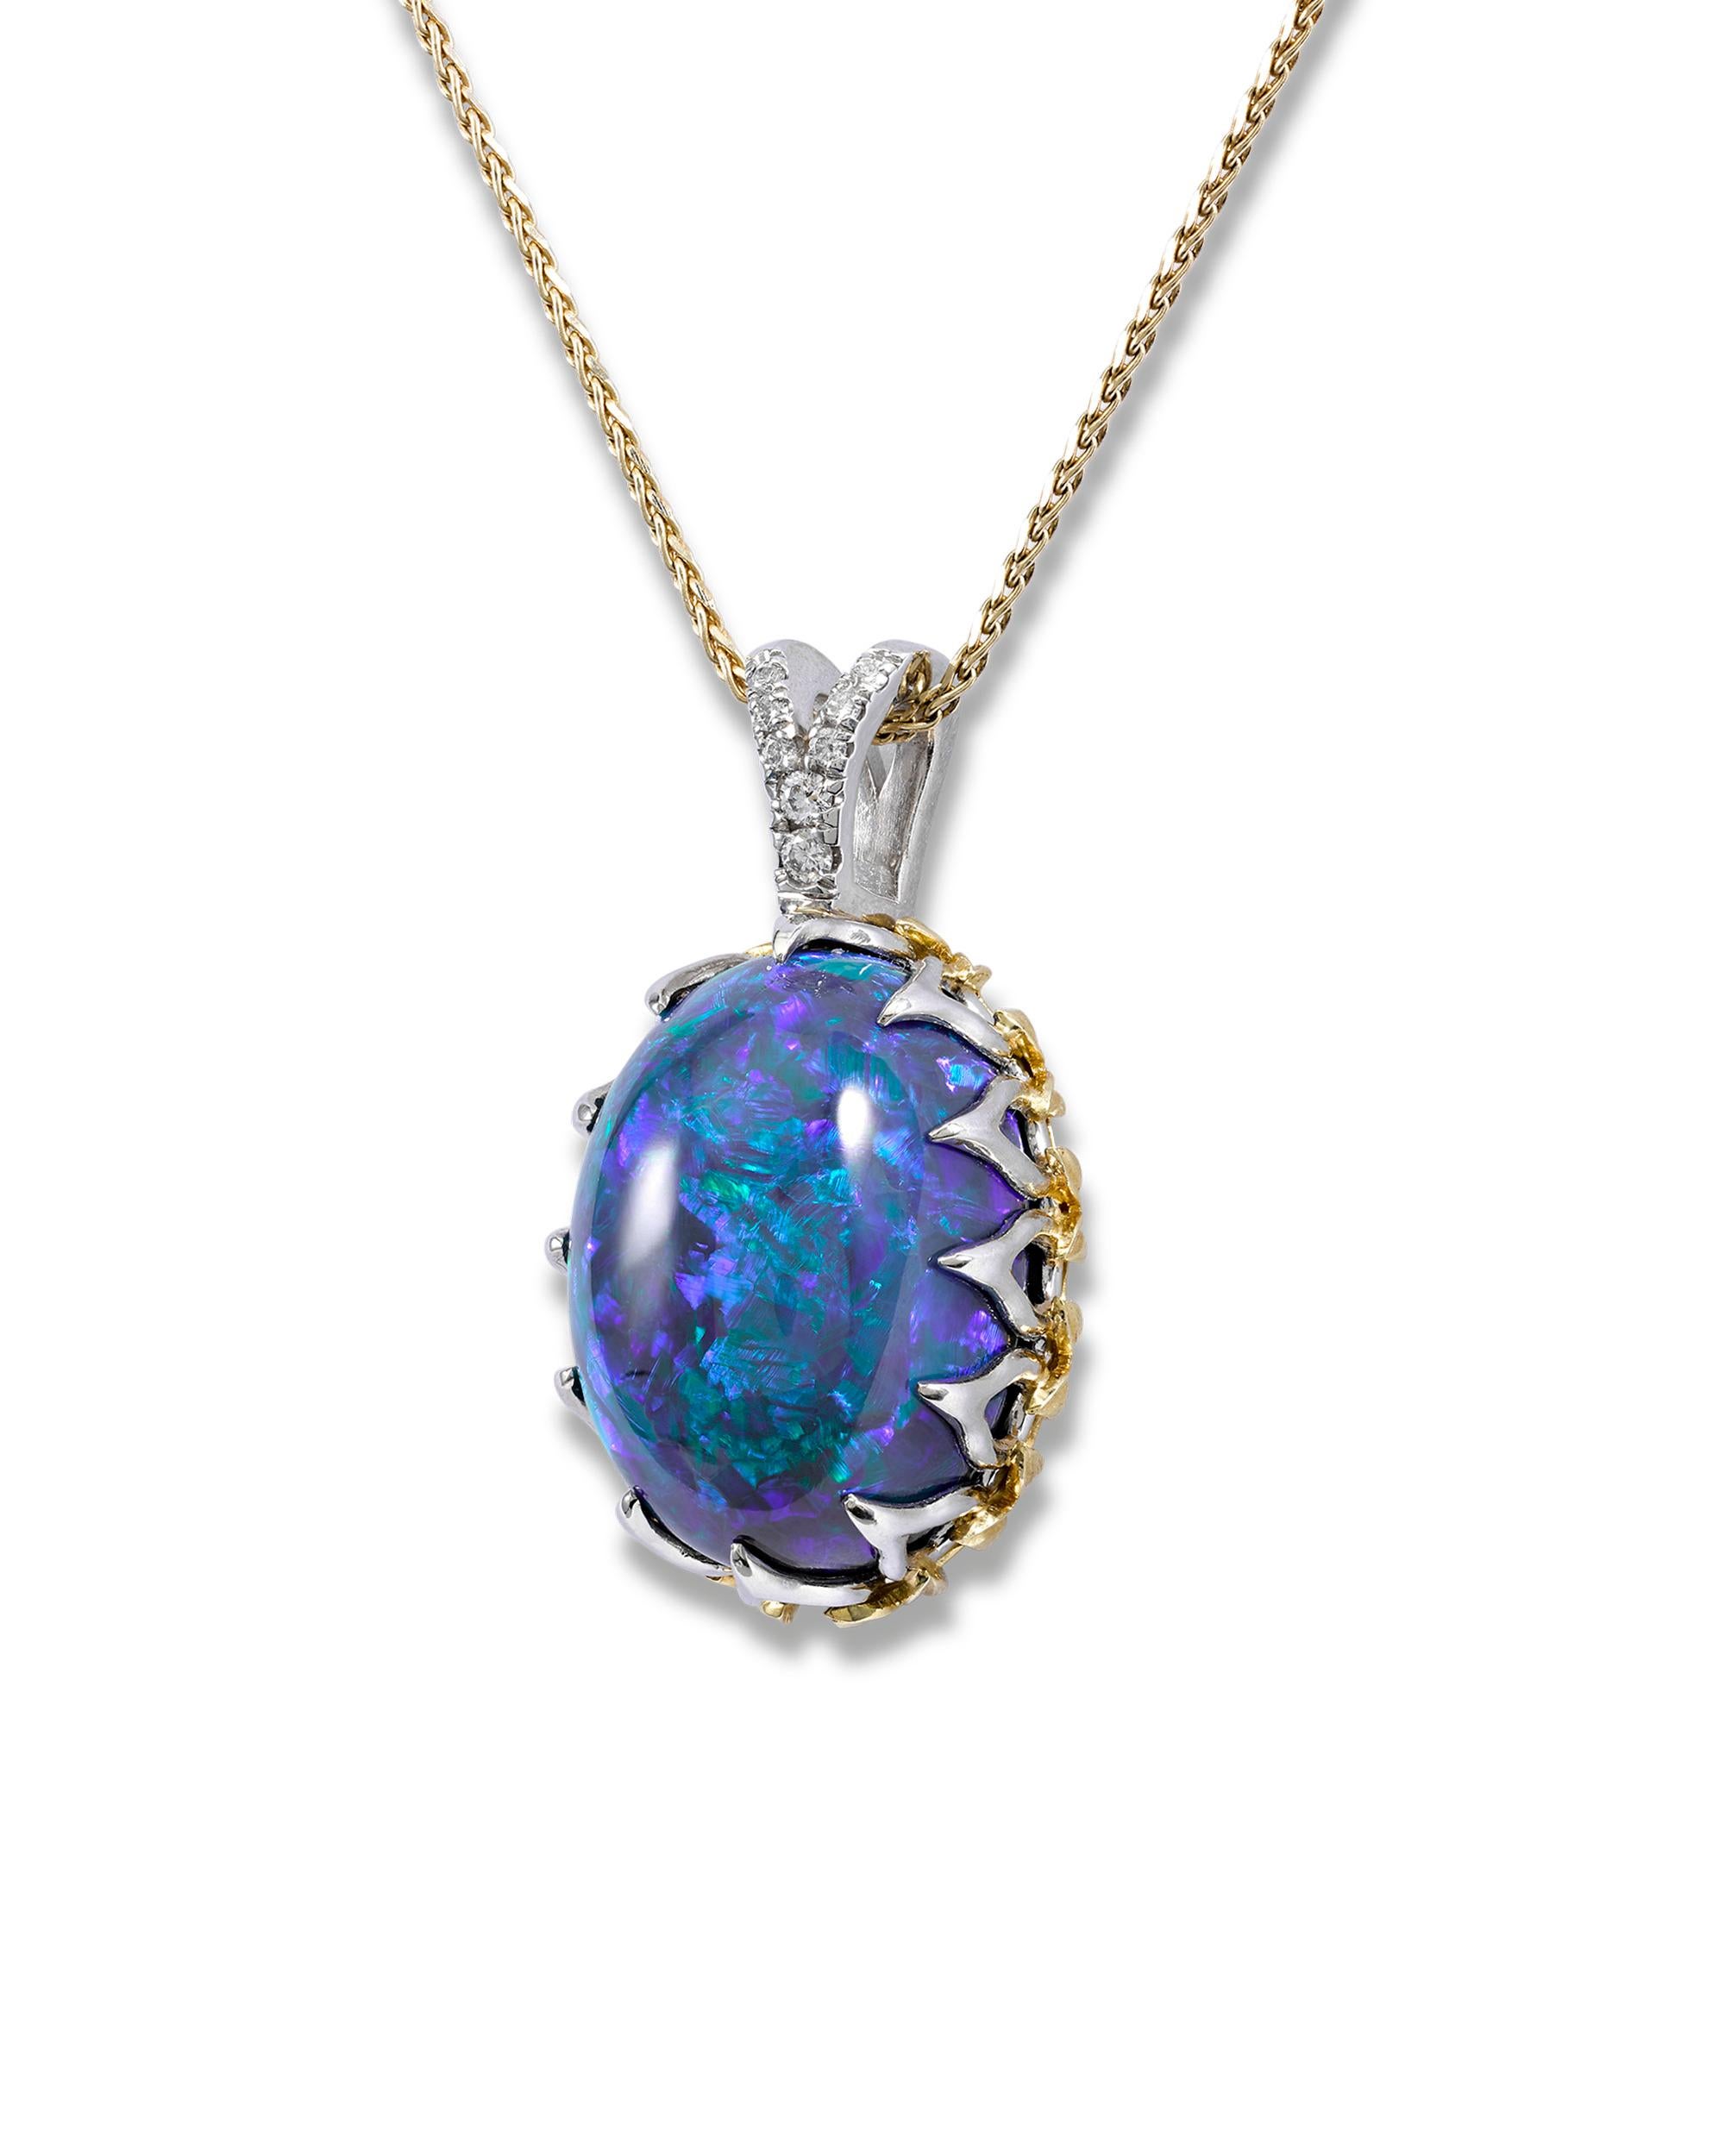 A stunning 20.56-carat black opal displays a kaleidoscope of color in this eye-catching necklace. Displaying an impressive range of iridescent blue and green hues, this extremely rare stone is complemented by approximately 0.08 carats of sparkling